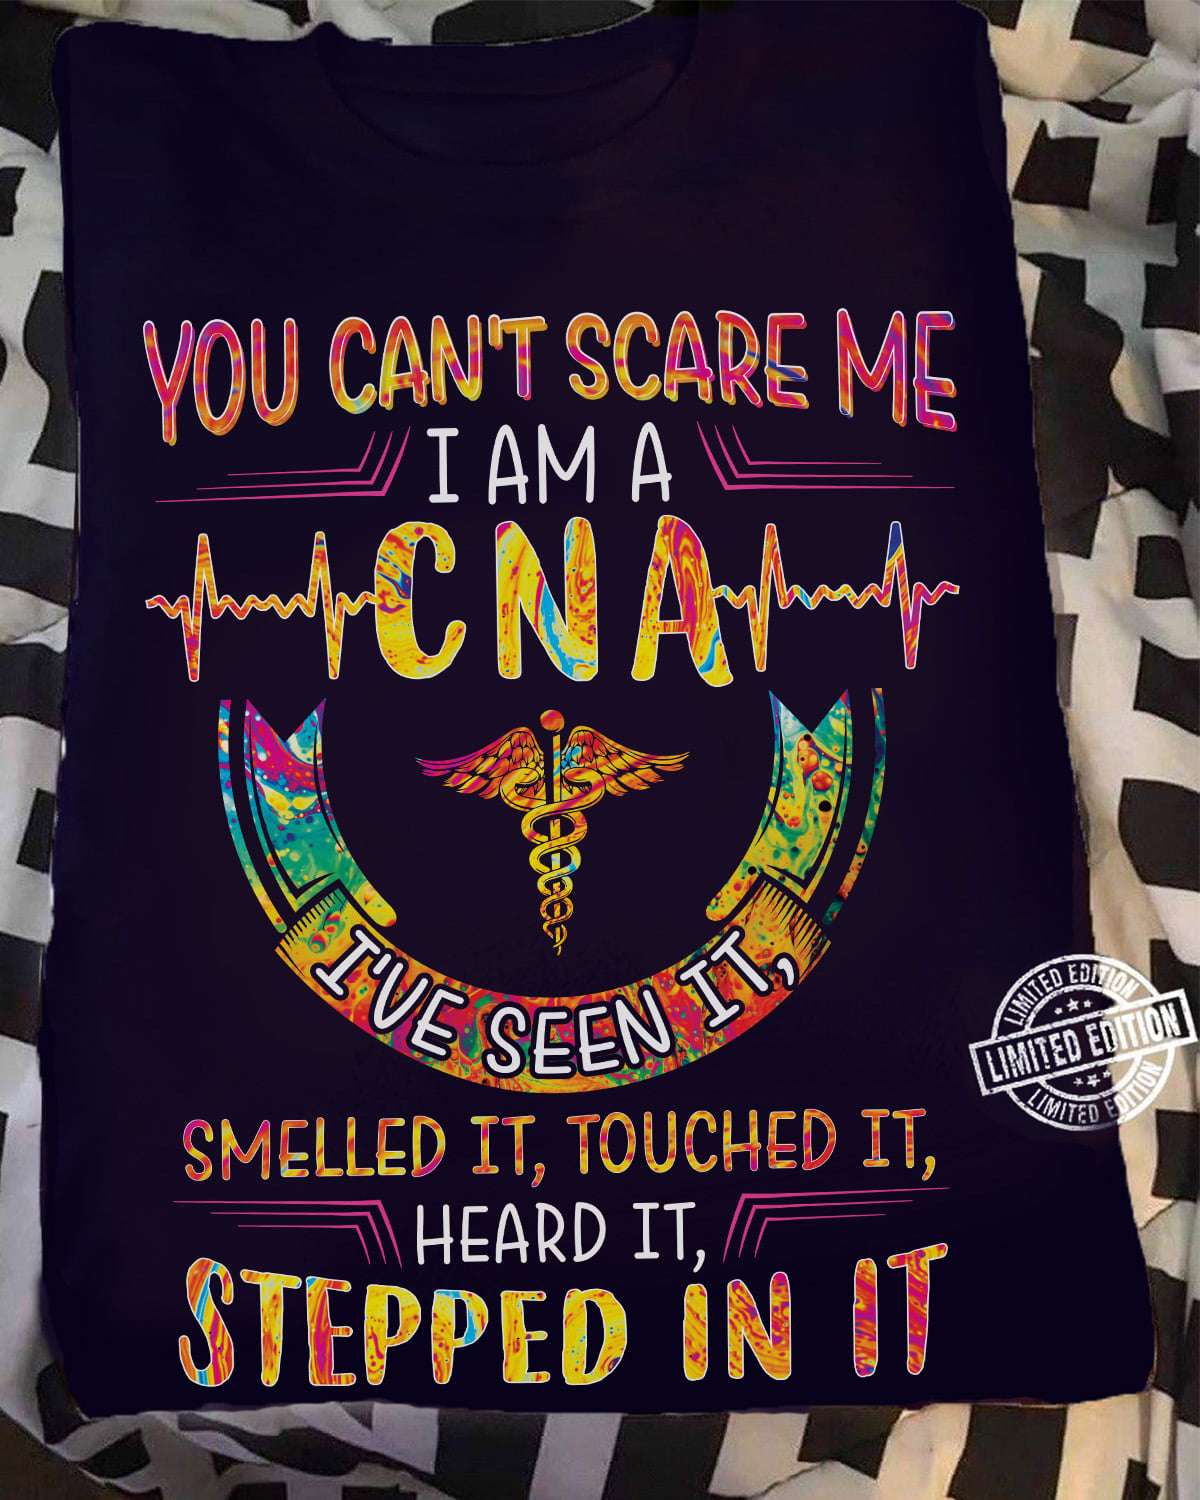 You can't scare me I am a CNA - Certified nursing assistance, CNA the job